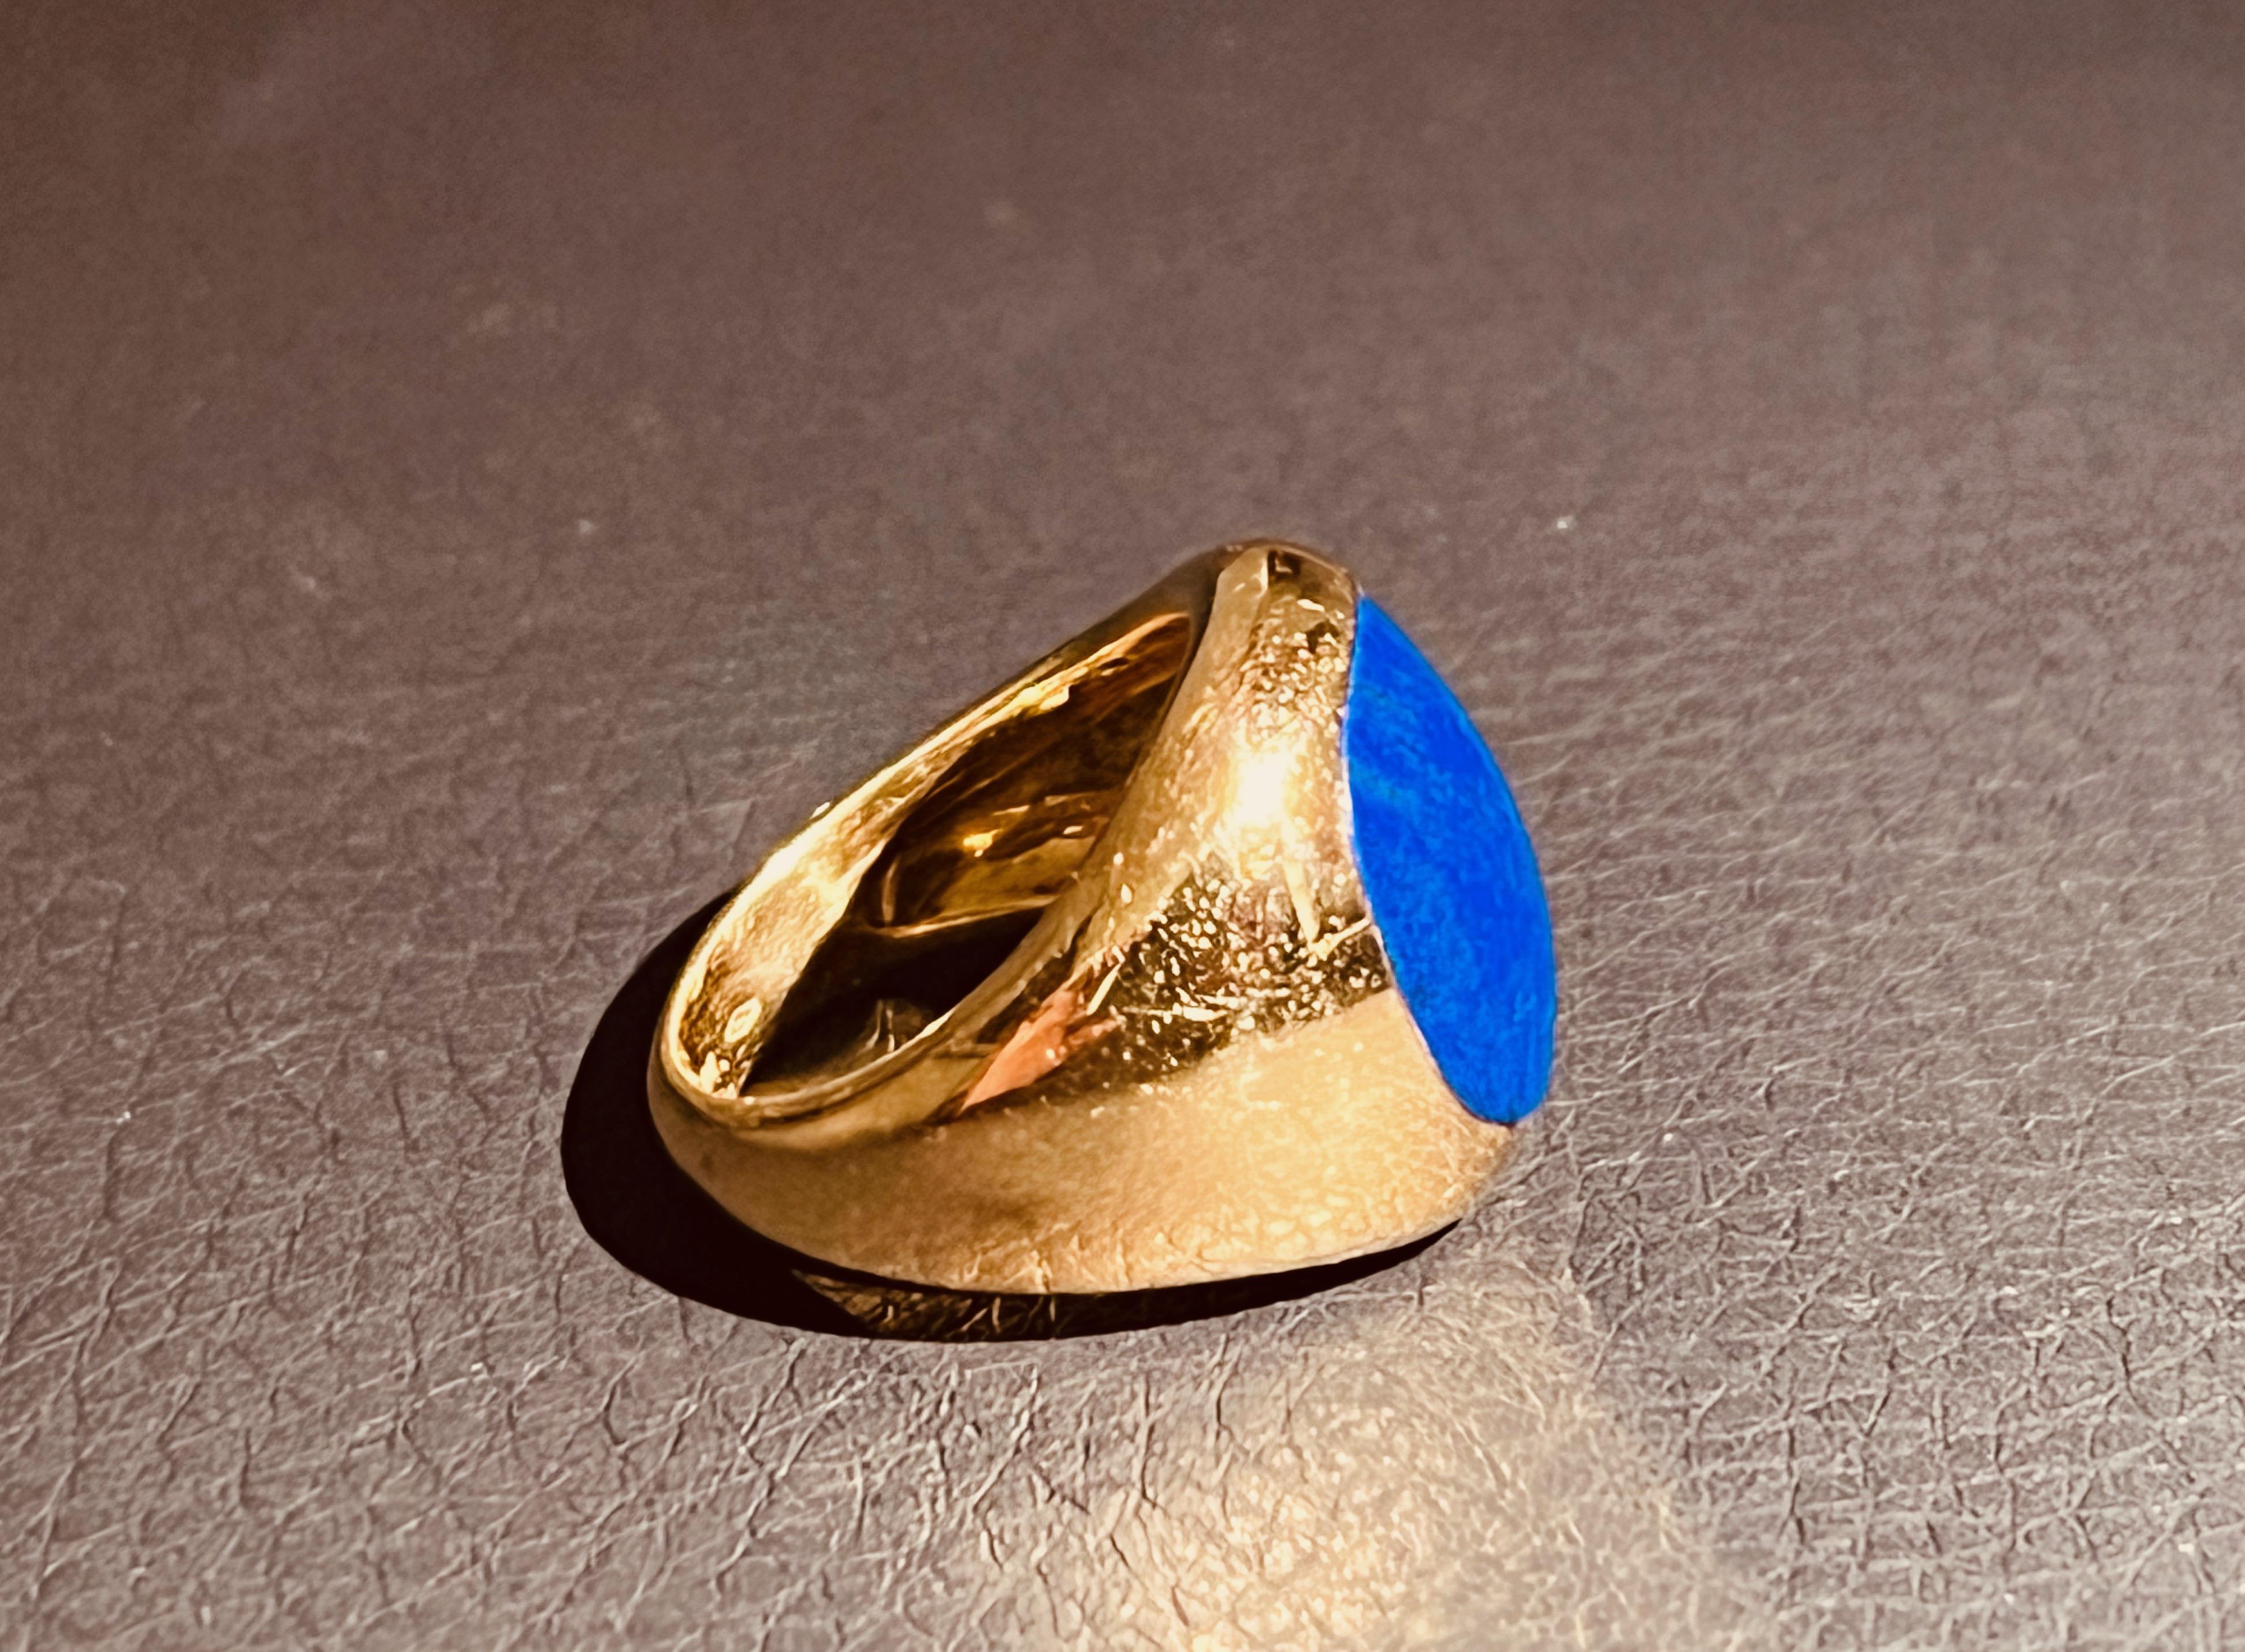 A Cushion Shaped Lapis Lazuli Mounted In a 18 Carat Yellow Gold Signet Ring  For Sale 4